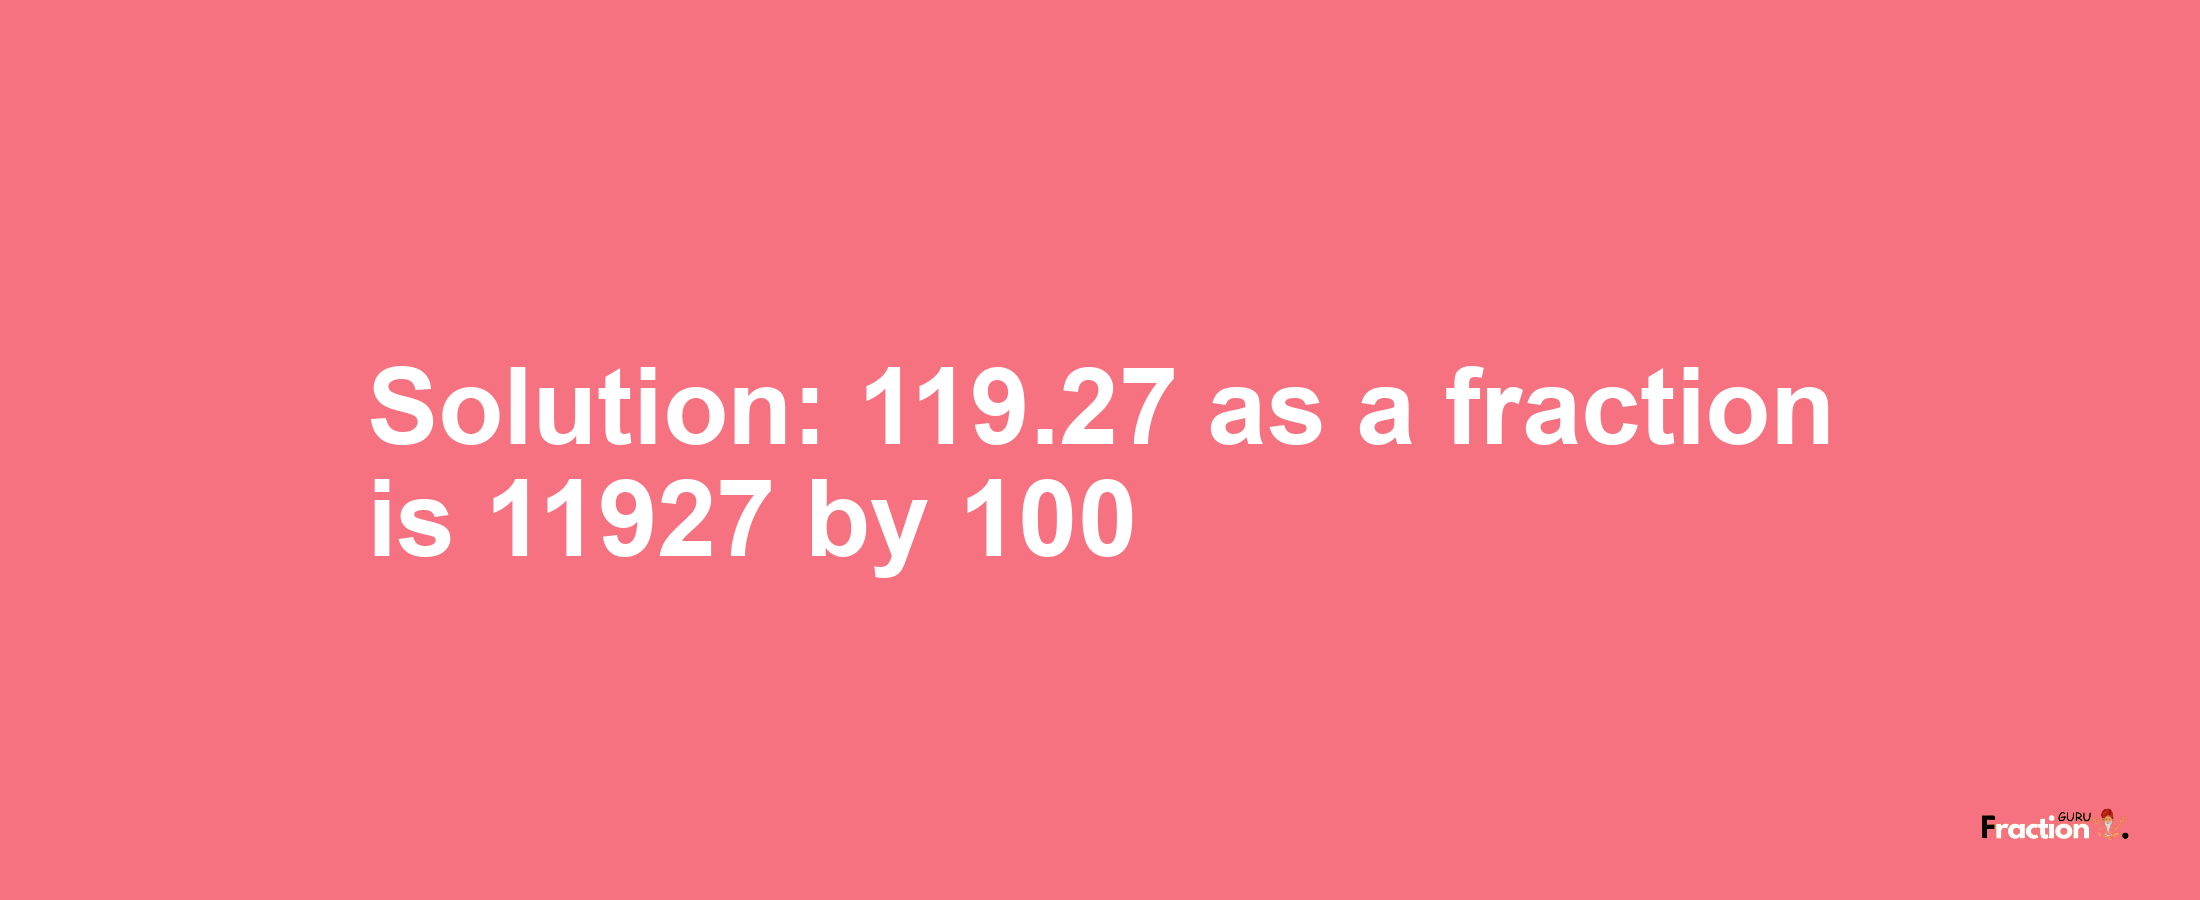 Solution:119.27 as a fraction is 11927/100